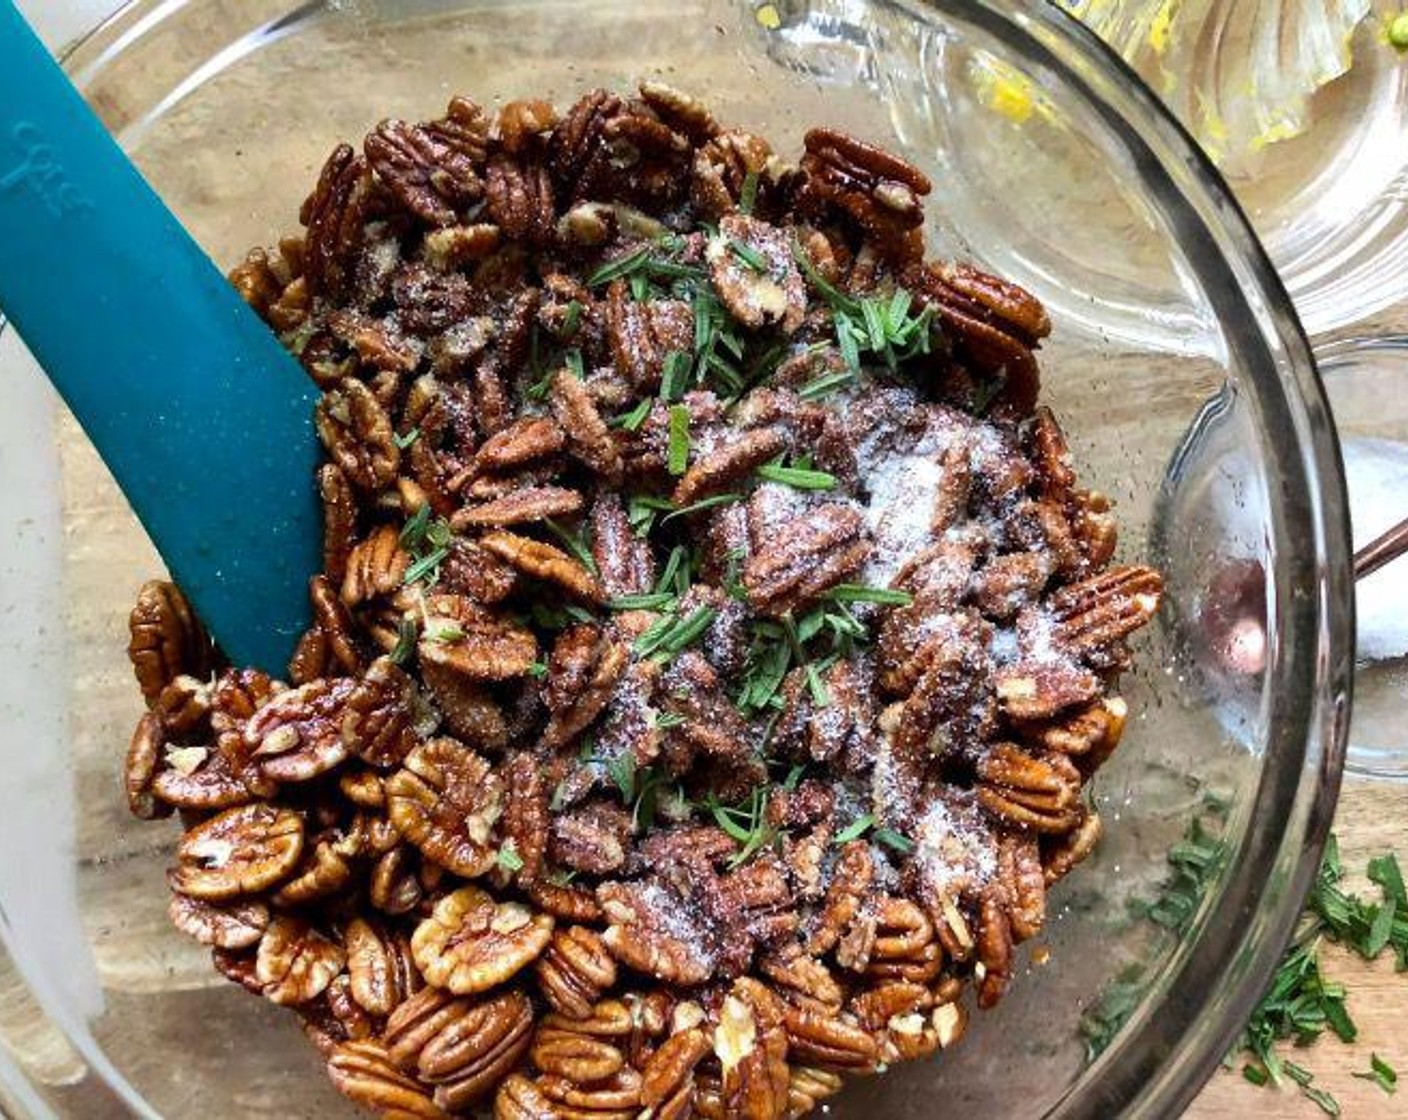 step 4 Pour mixture over the pecan halves and stir to fully incorporate. Add Fresh Rosemary (2 Tbsp) and Kosher Salt (1/2 Tbsp) and toss again to coat the nuts evenly. Turn onto the prepared sheet pan.